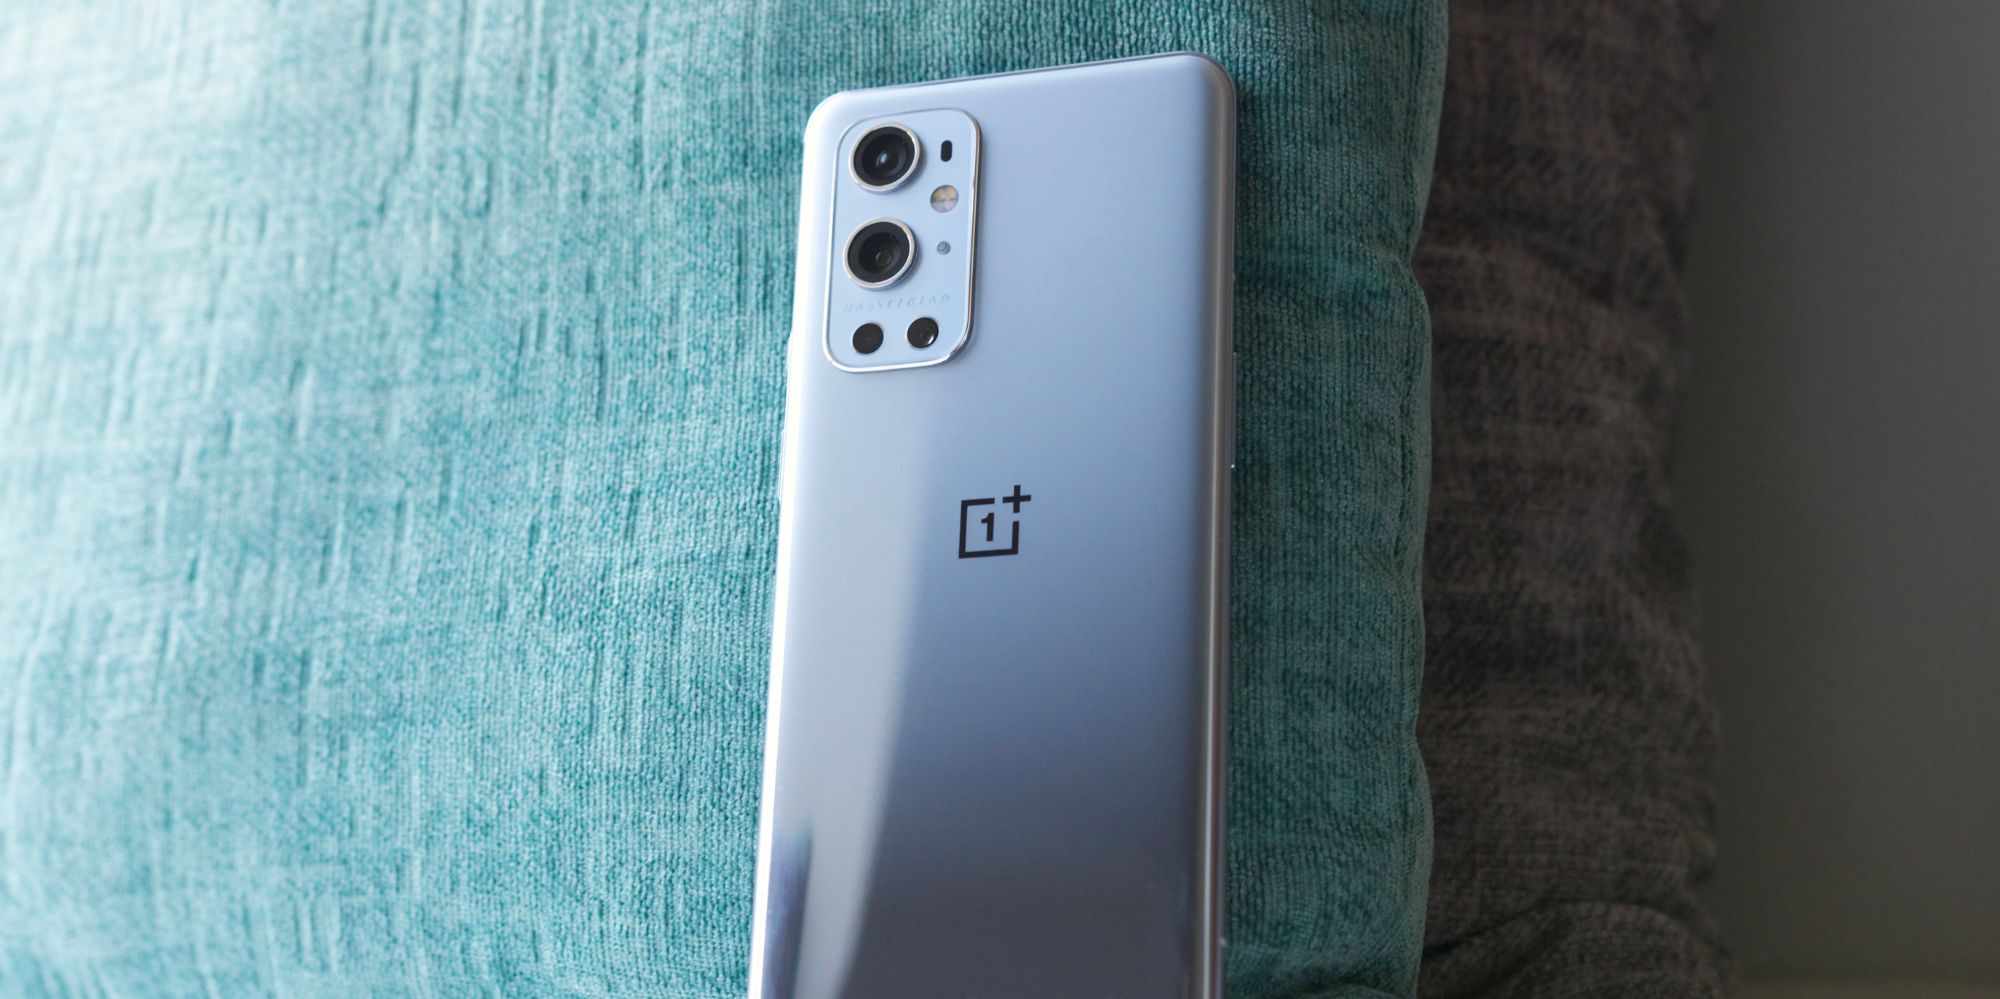 OnePlus 9 Pro standing up against a pillow